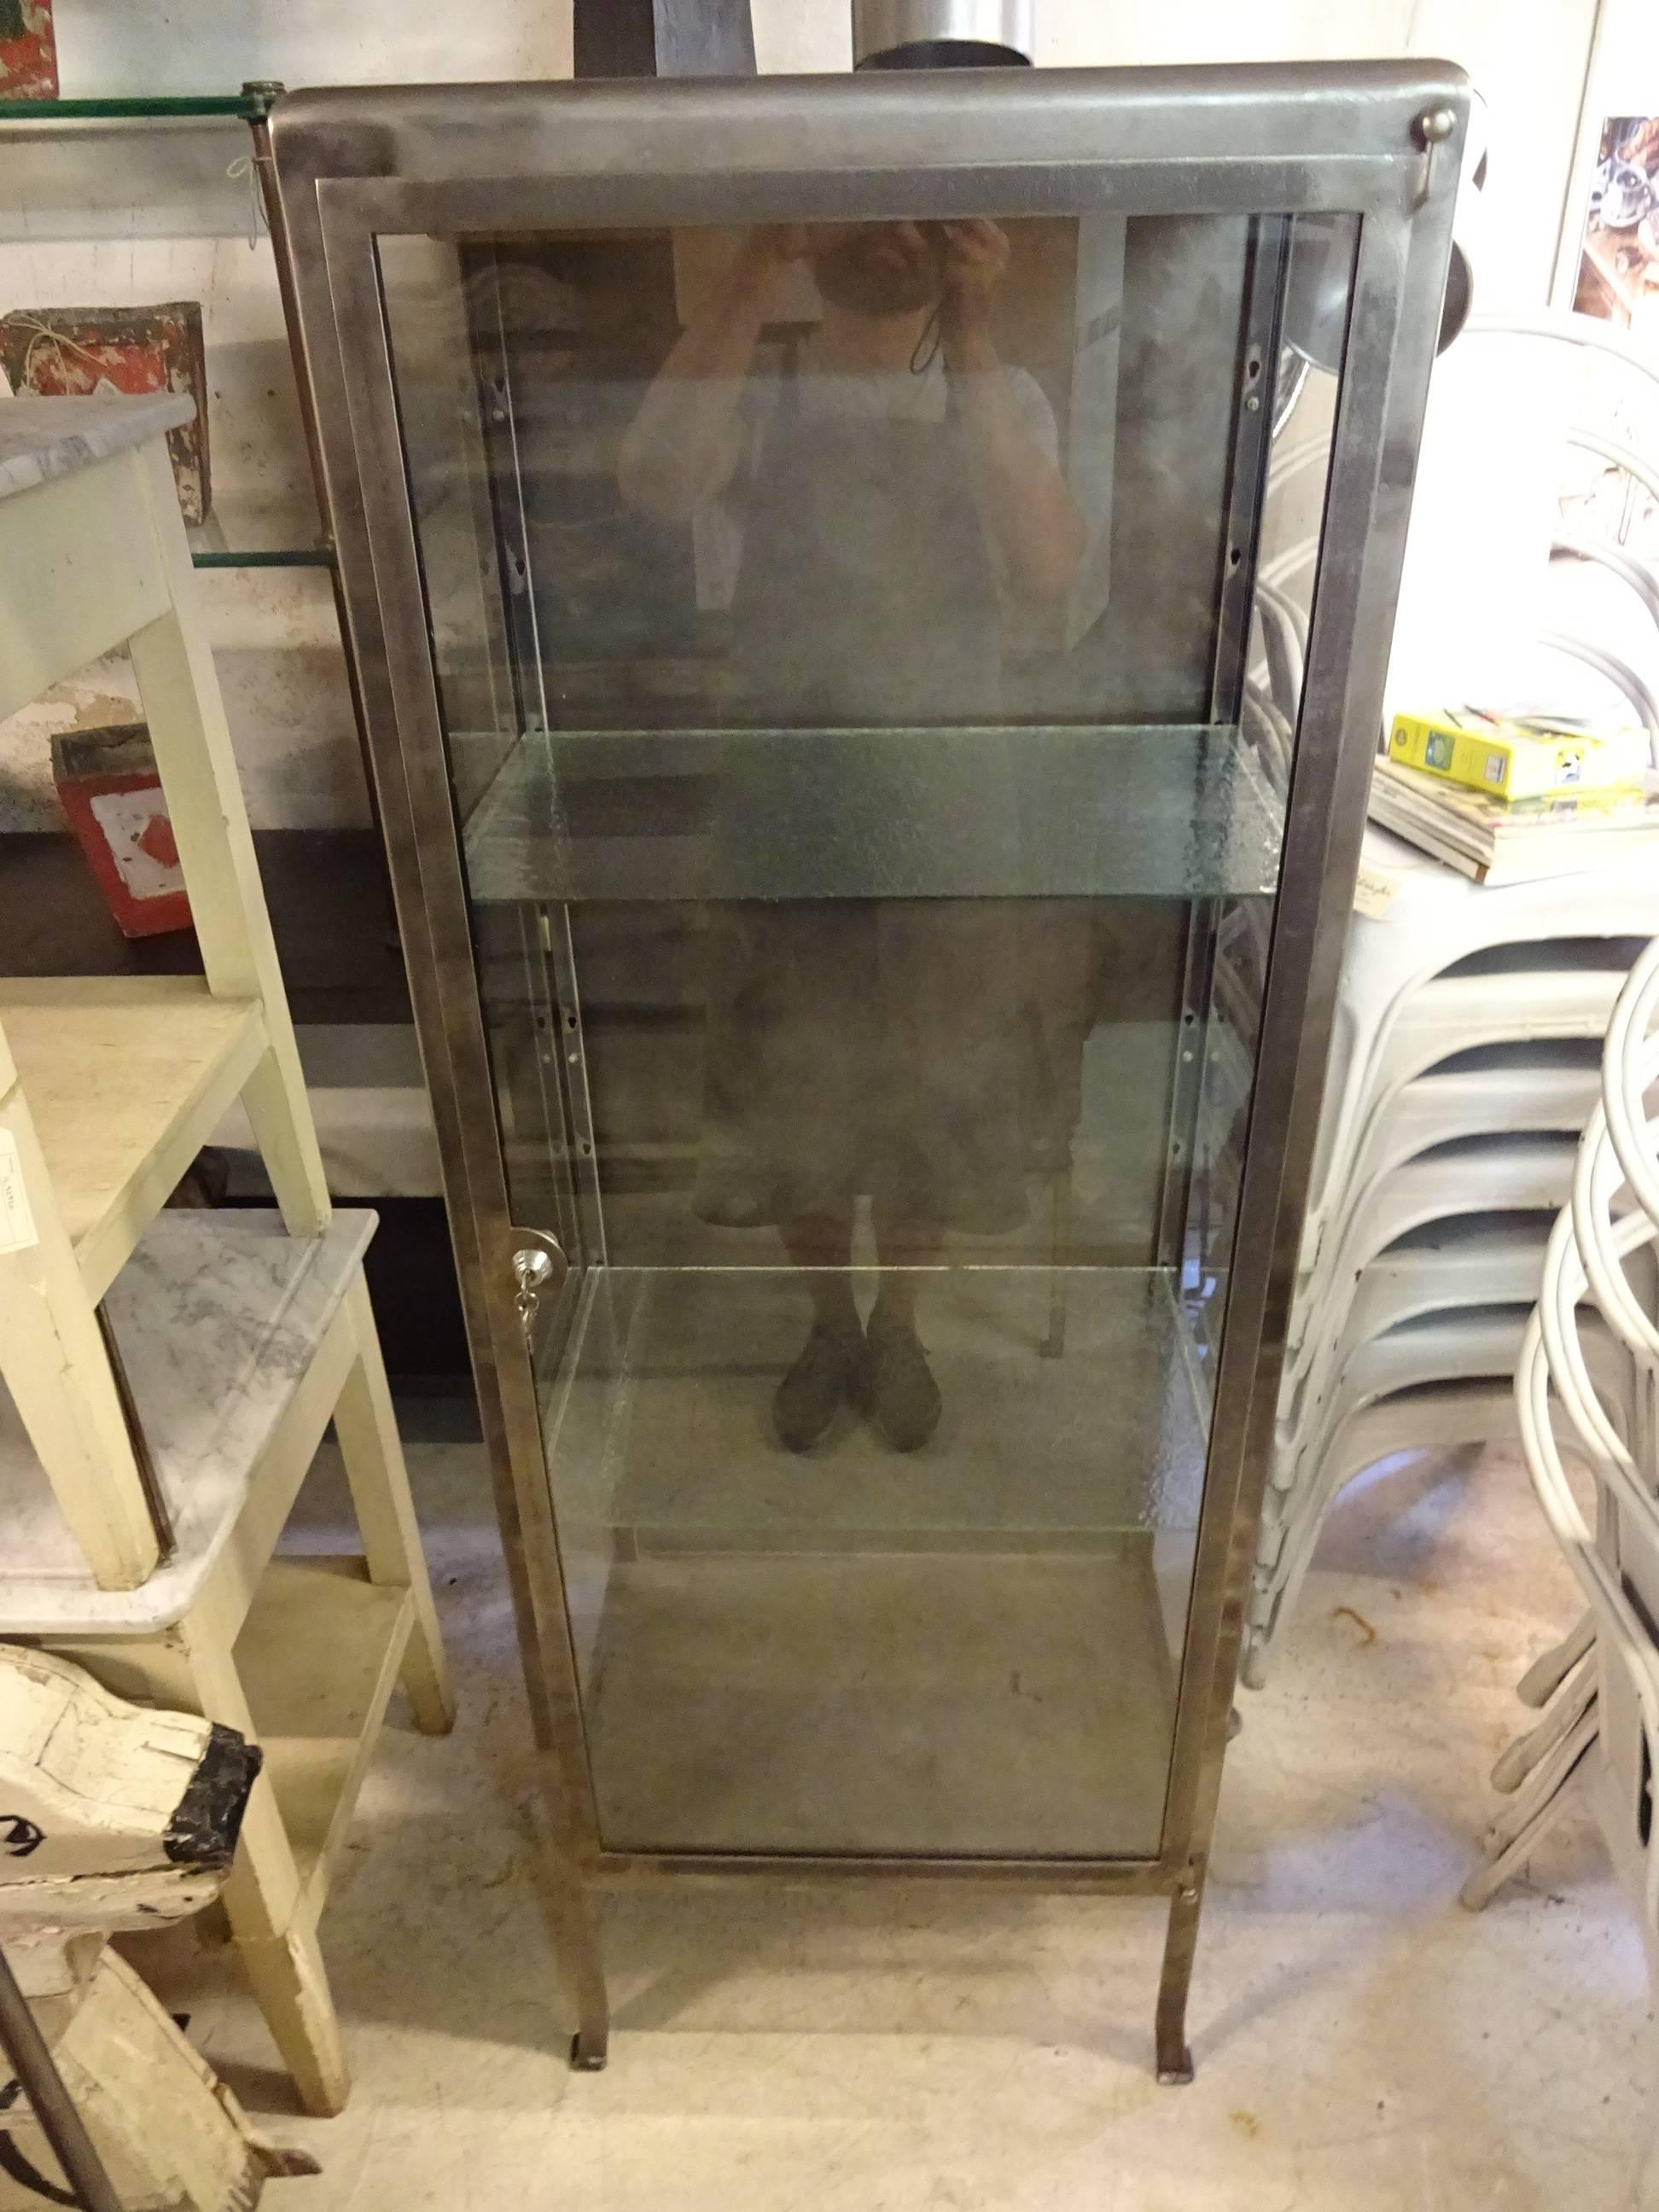 French Display Cabinet